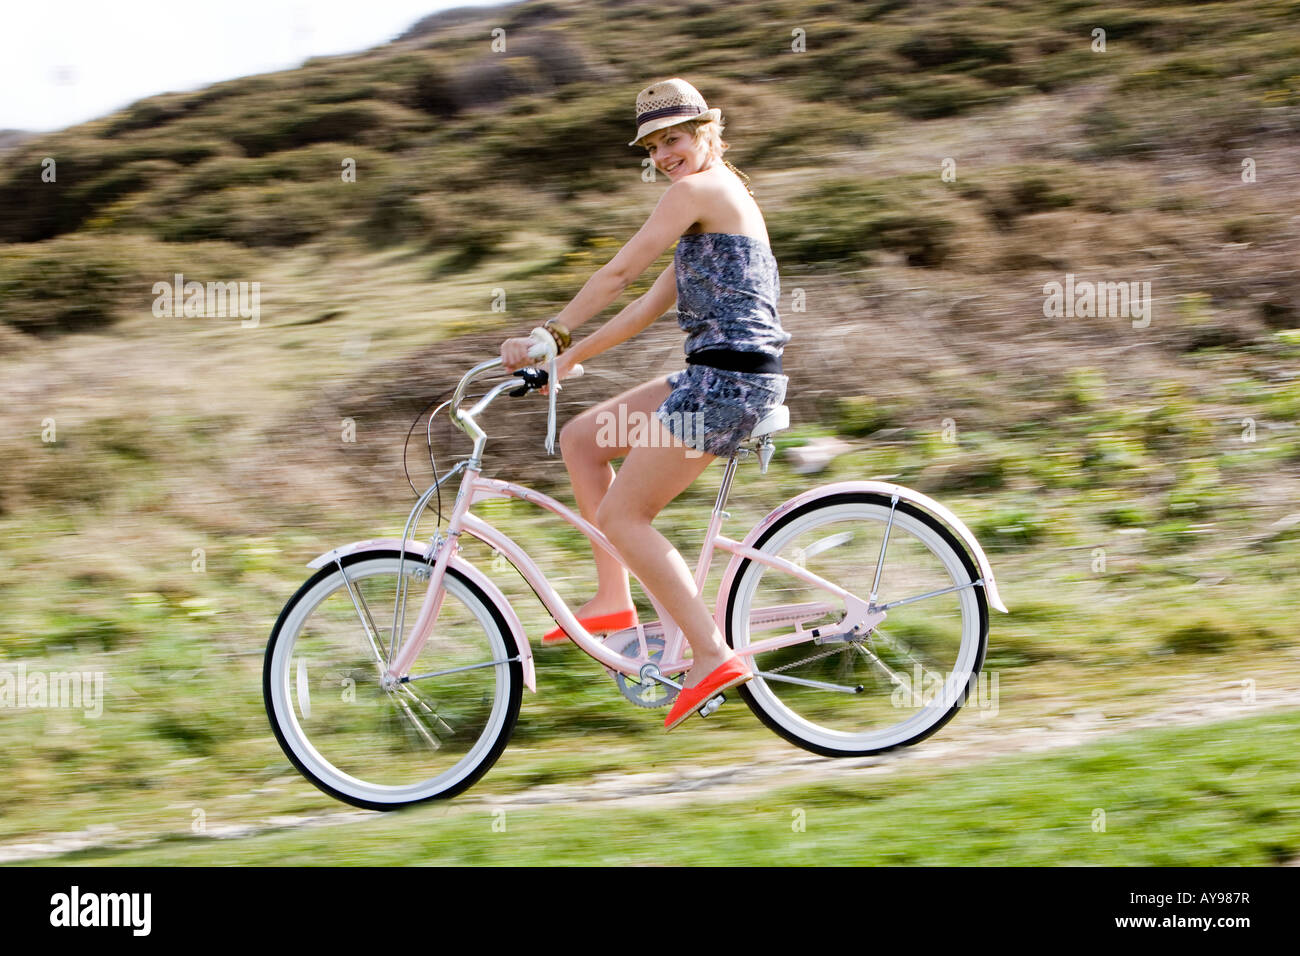 Girl on bike in strapless dress and sunhat Stock Photo